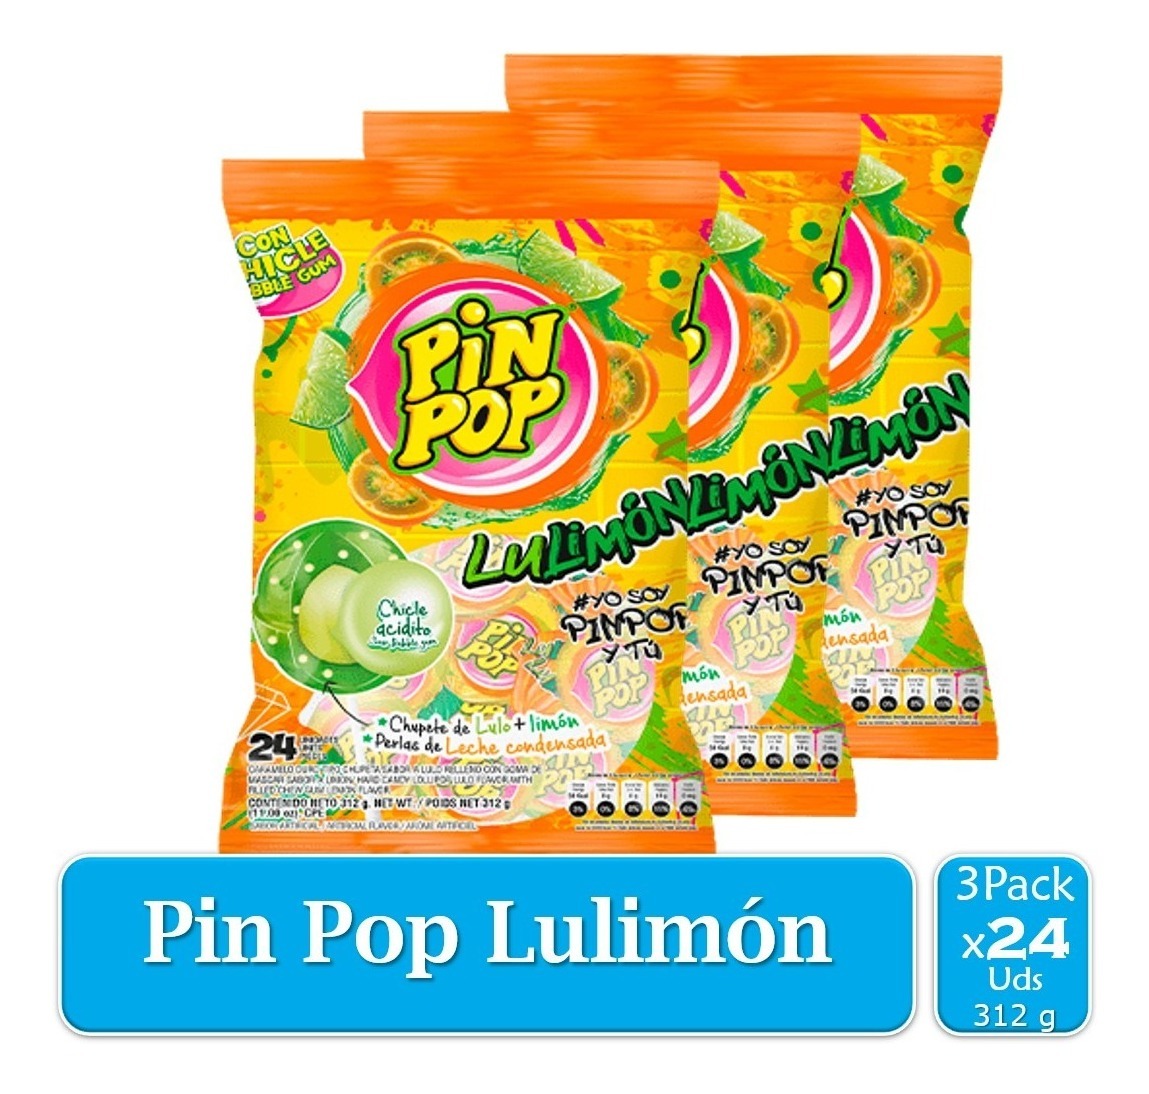 Chupete Pin Pop Lulimon 3 Paquetes X24 Uds